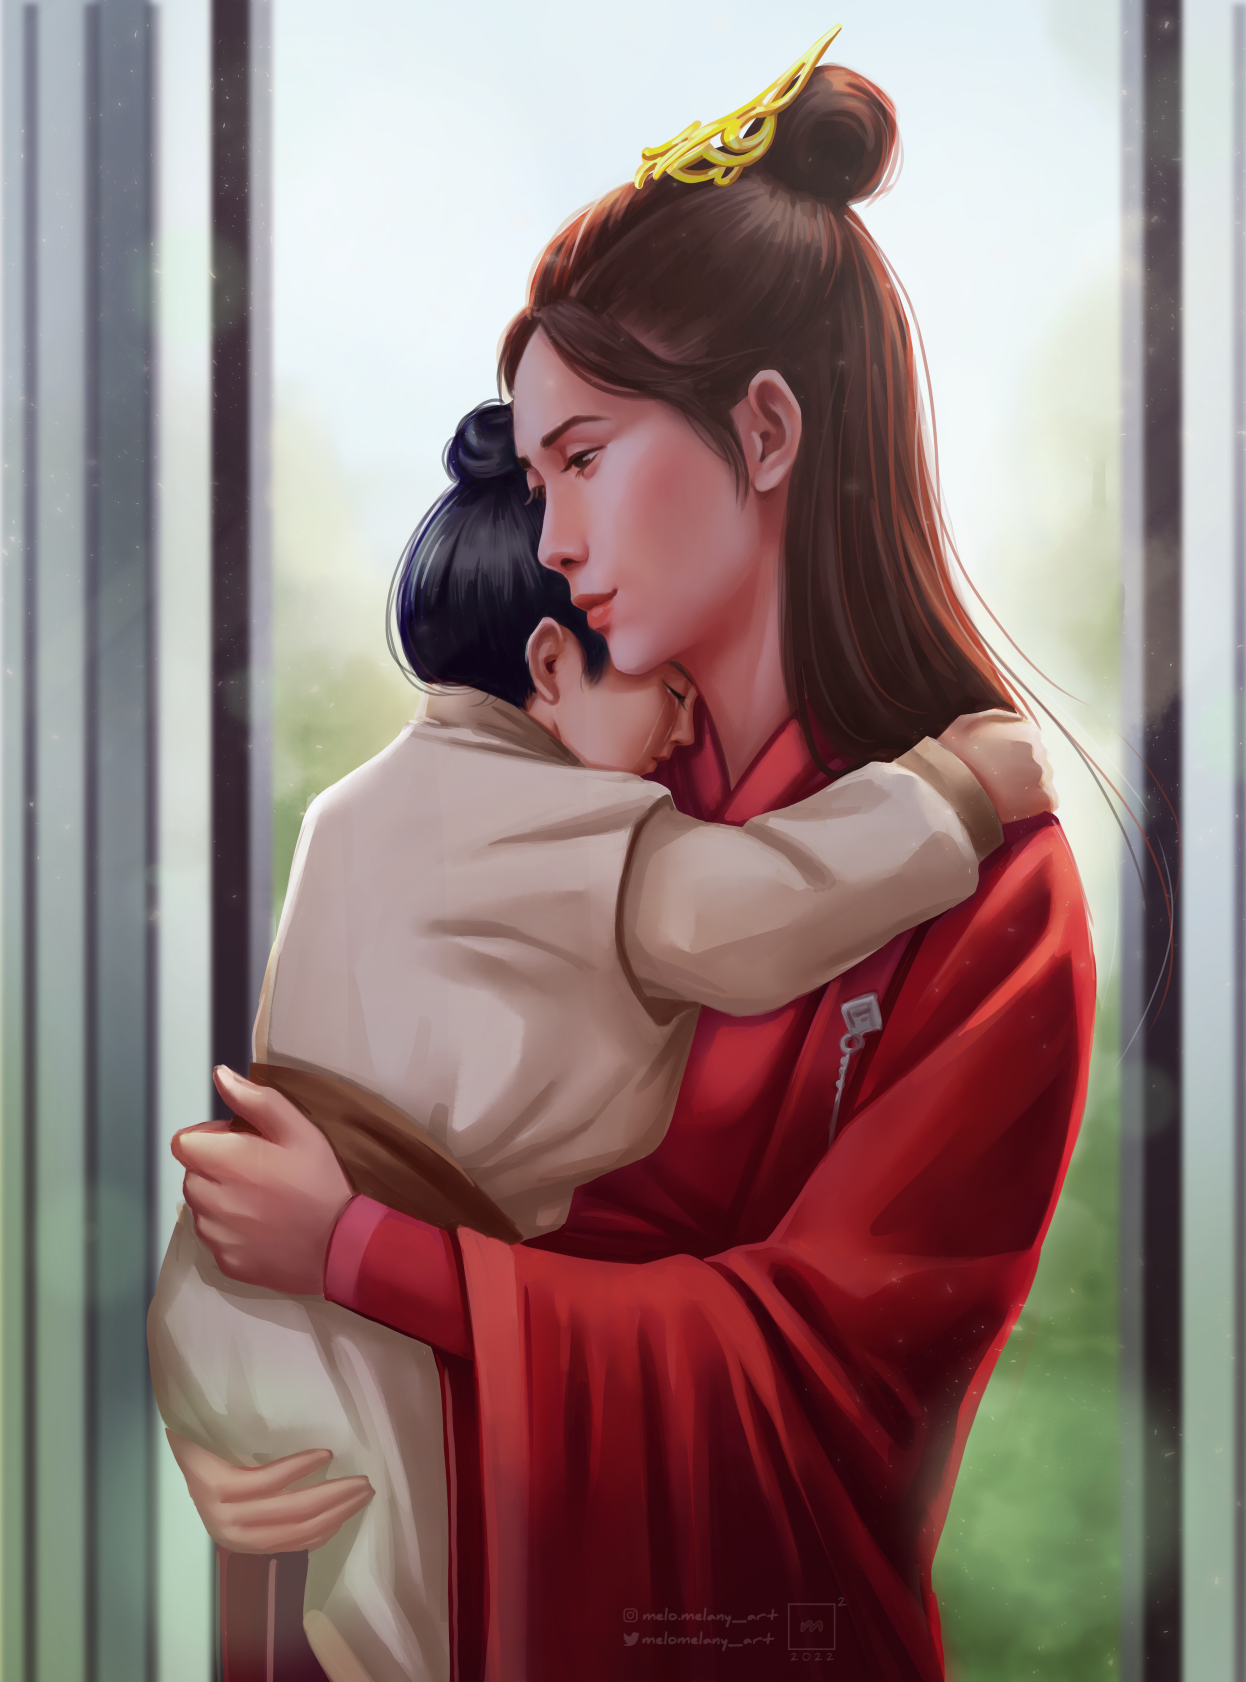 Fully shaded drawing of Wen Qing, a Chinese woman in traditional dress, wearing red, holding Mo Xuanyu, a small seven-year-old, in her arms as he cries with relief. Her expression is tender, and his clothes are cream colored. His hair is in a high top knot, and her hair is half-up in an intricate guan. They are standing in a doorway with blurry greenery behind them. The art is by @melomelany_art on Twitter.